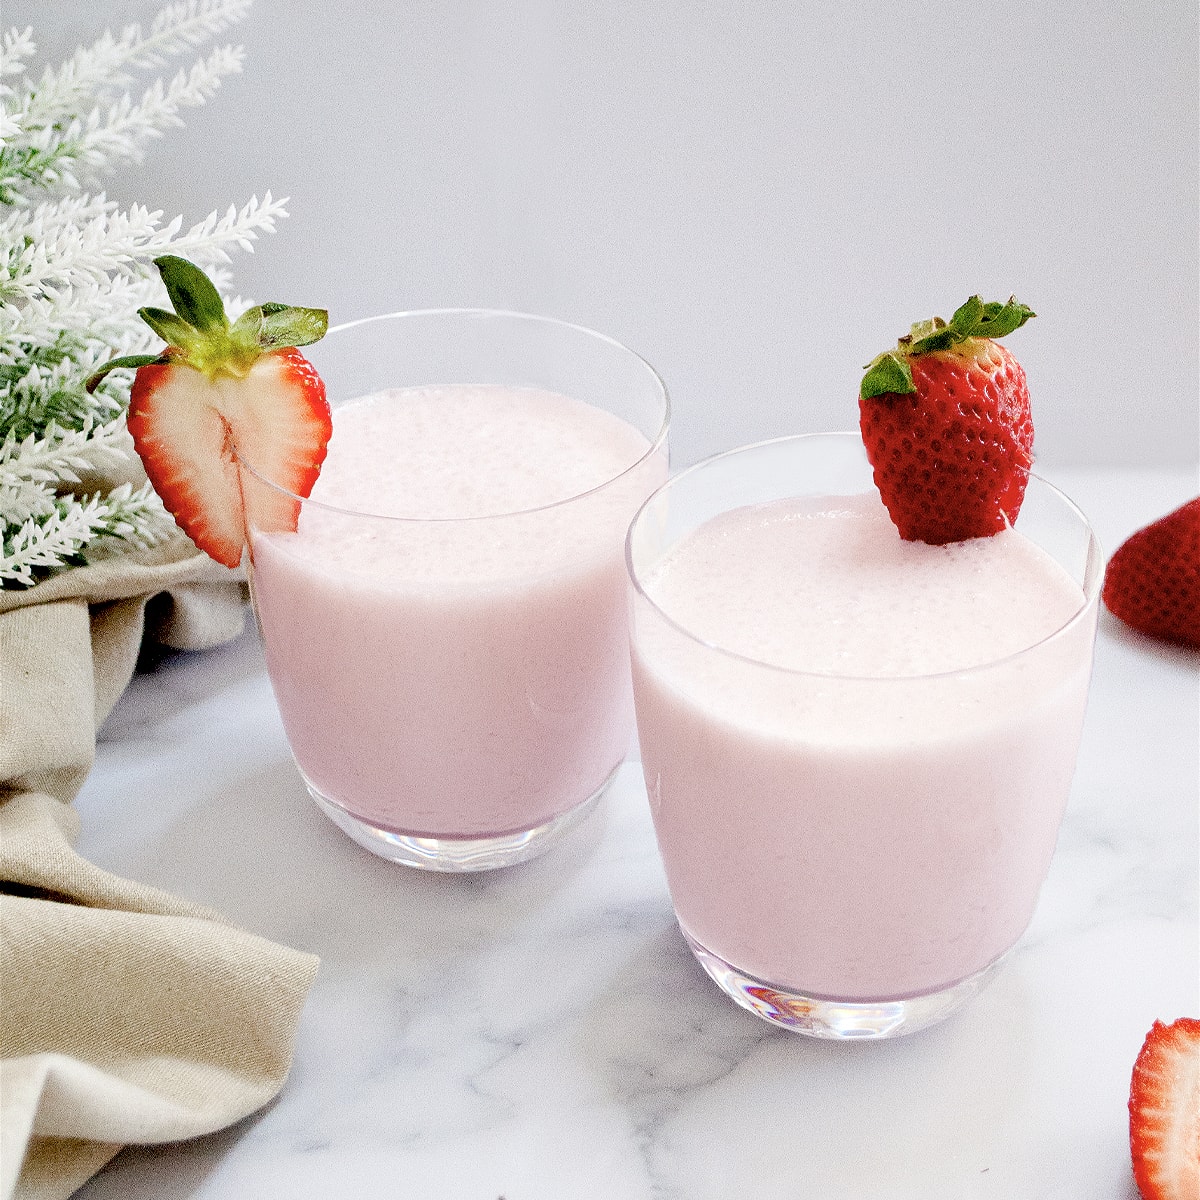 How to make strawberry lassi